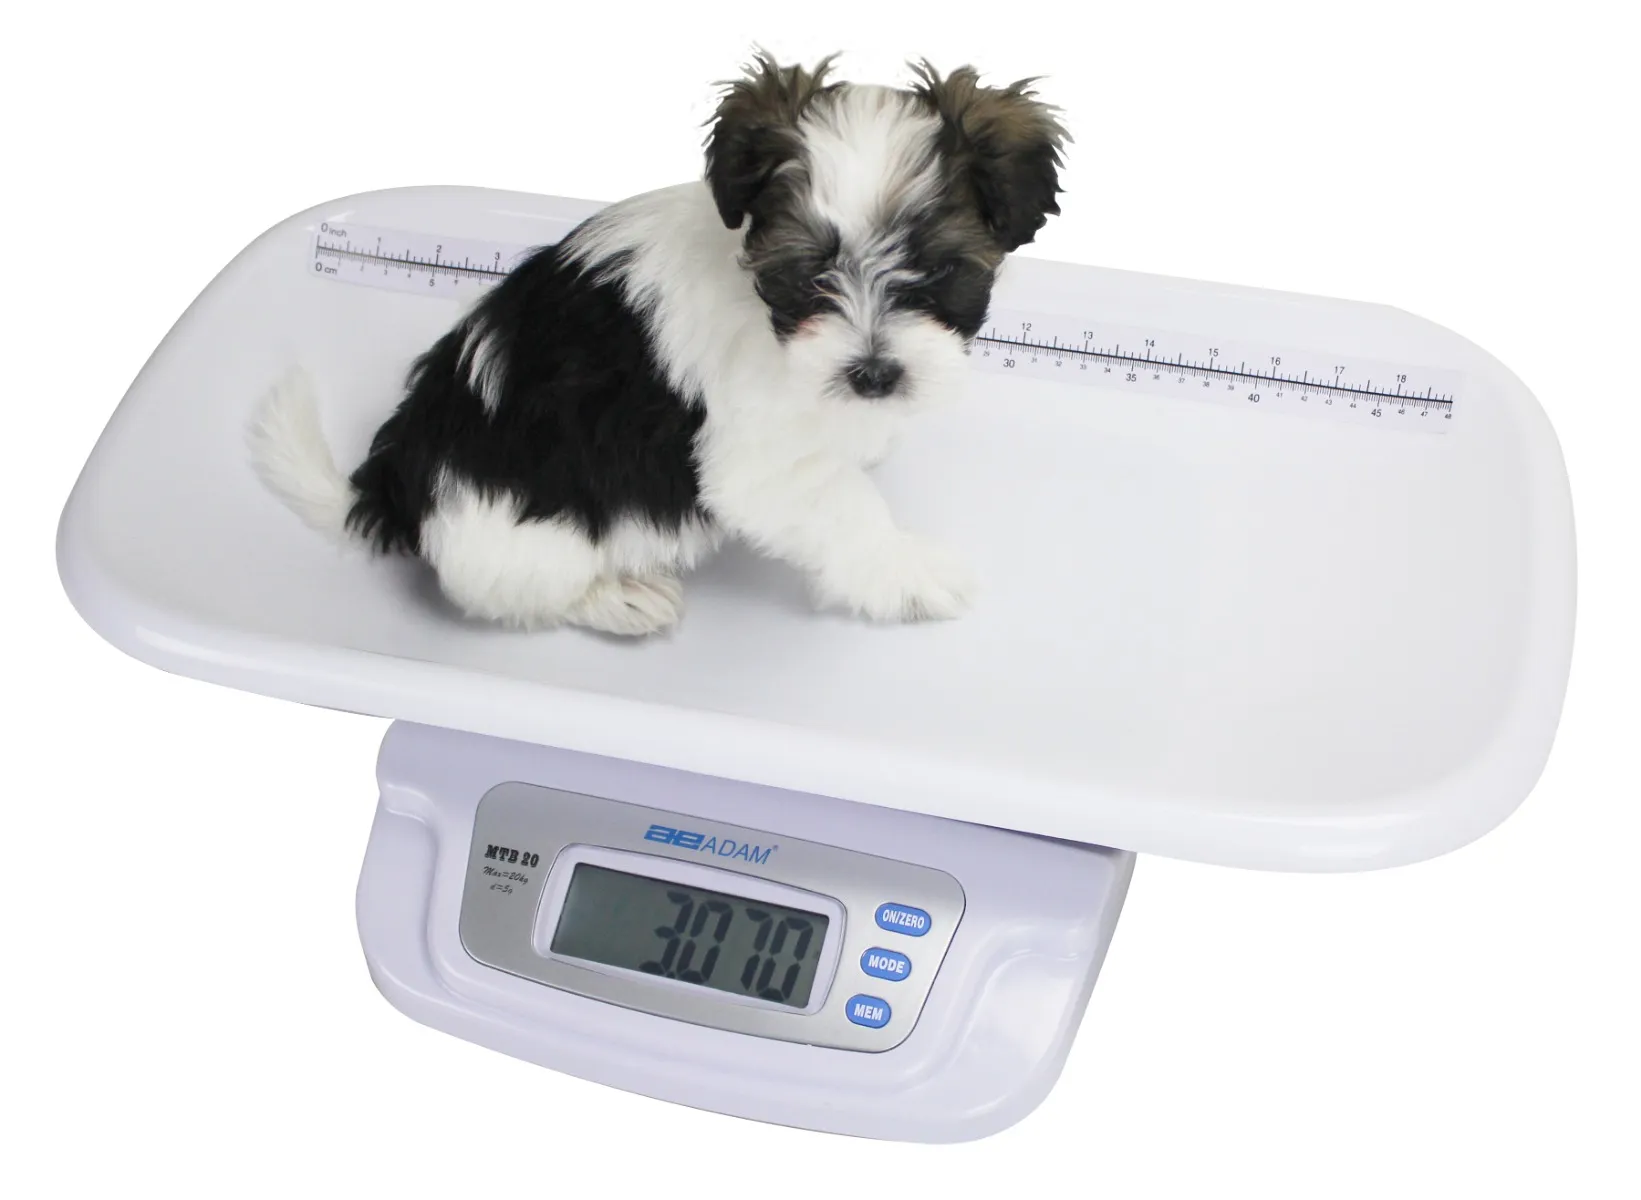 Small dog being weighed on the Adam Equipment MTB 20 scale